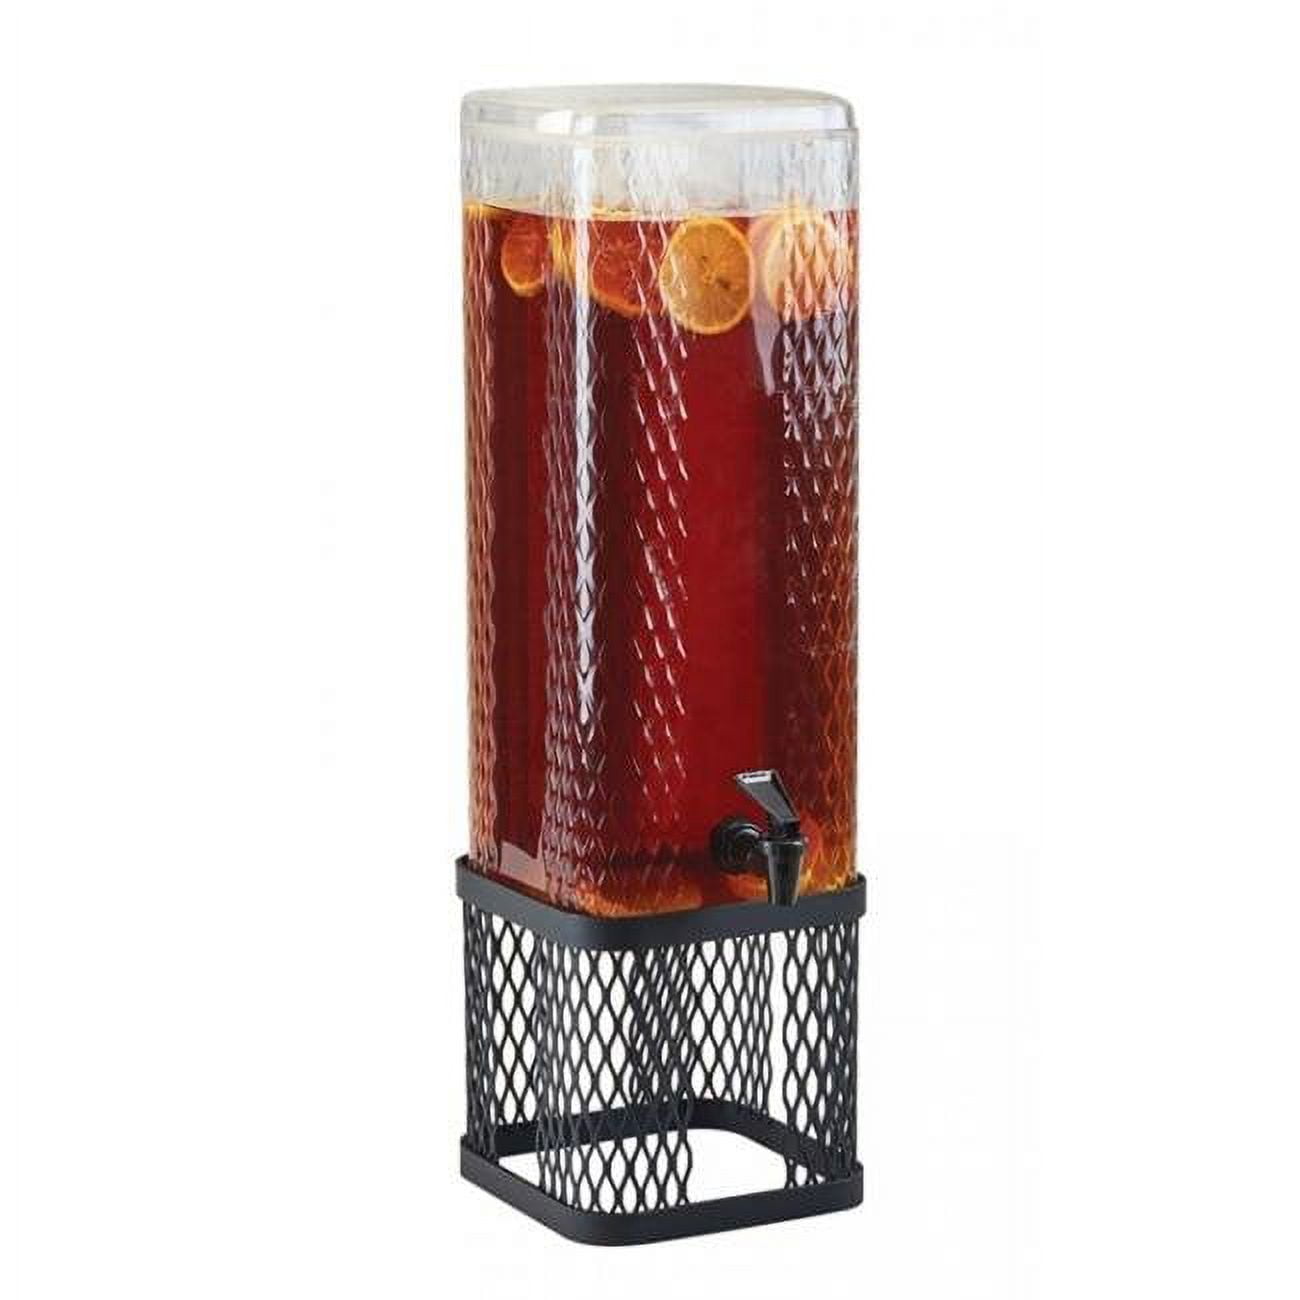 Picture of Cal Mil 22001-3INF-13 Black Diamond 3 gal Beverage Dispenser with Infusion Chamber & Black Metal Mesh Base - 8.125 x 9.75 x 25.75 in.